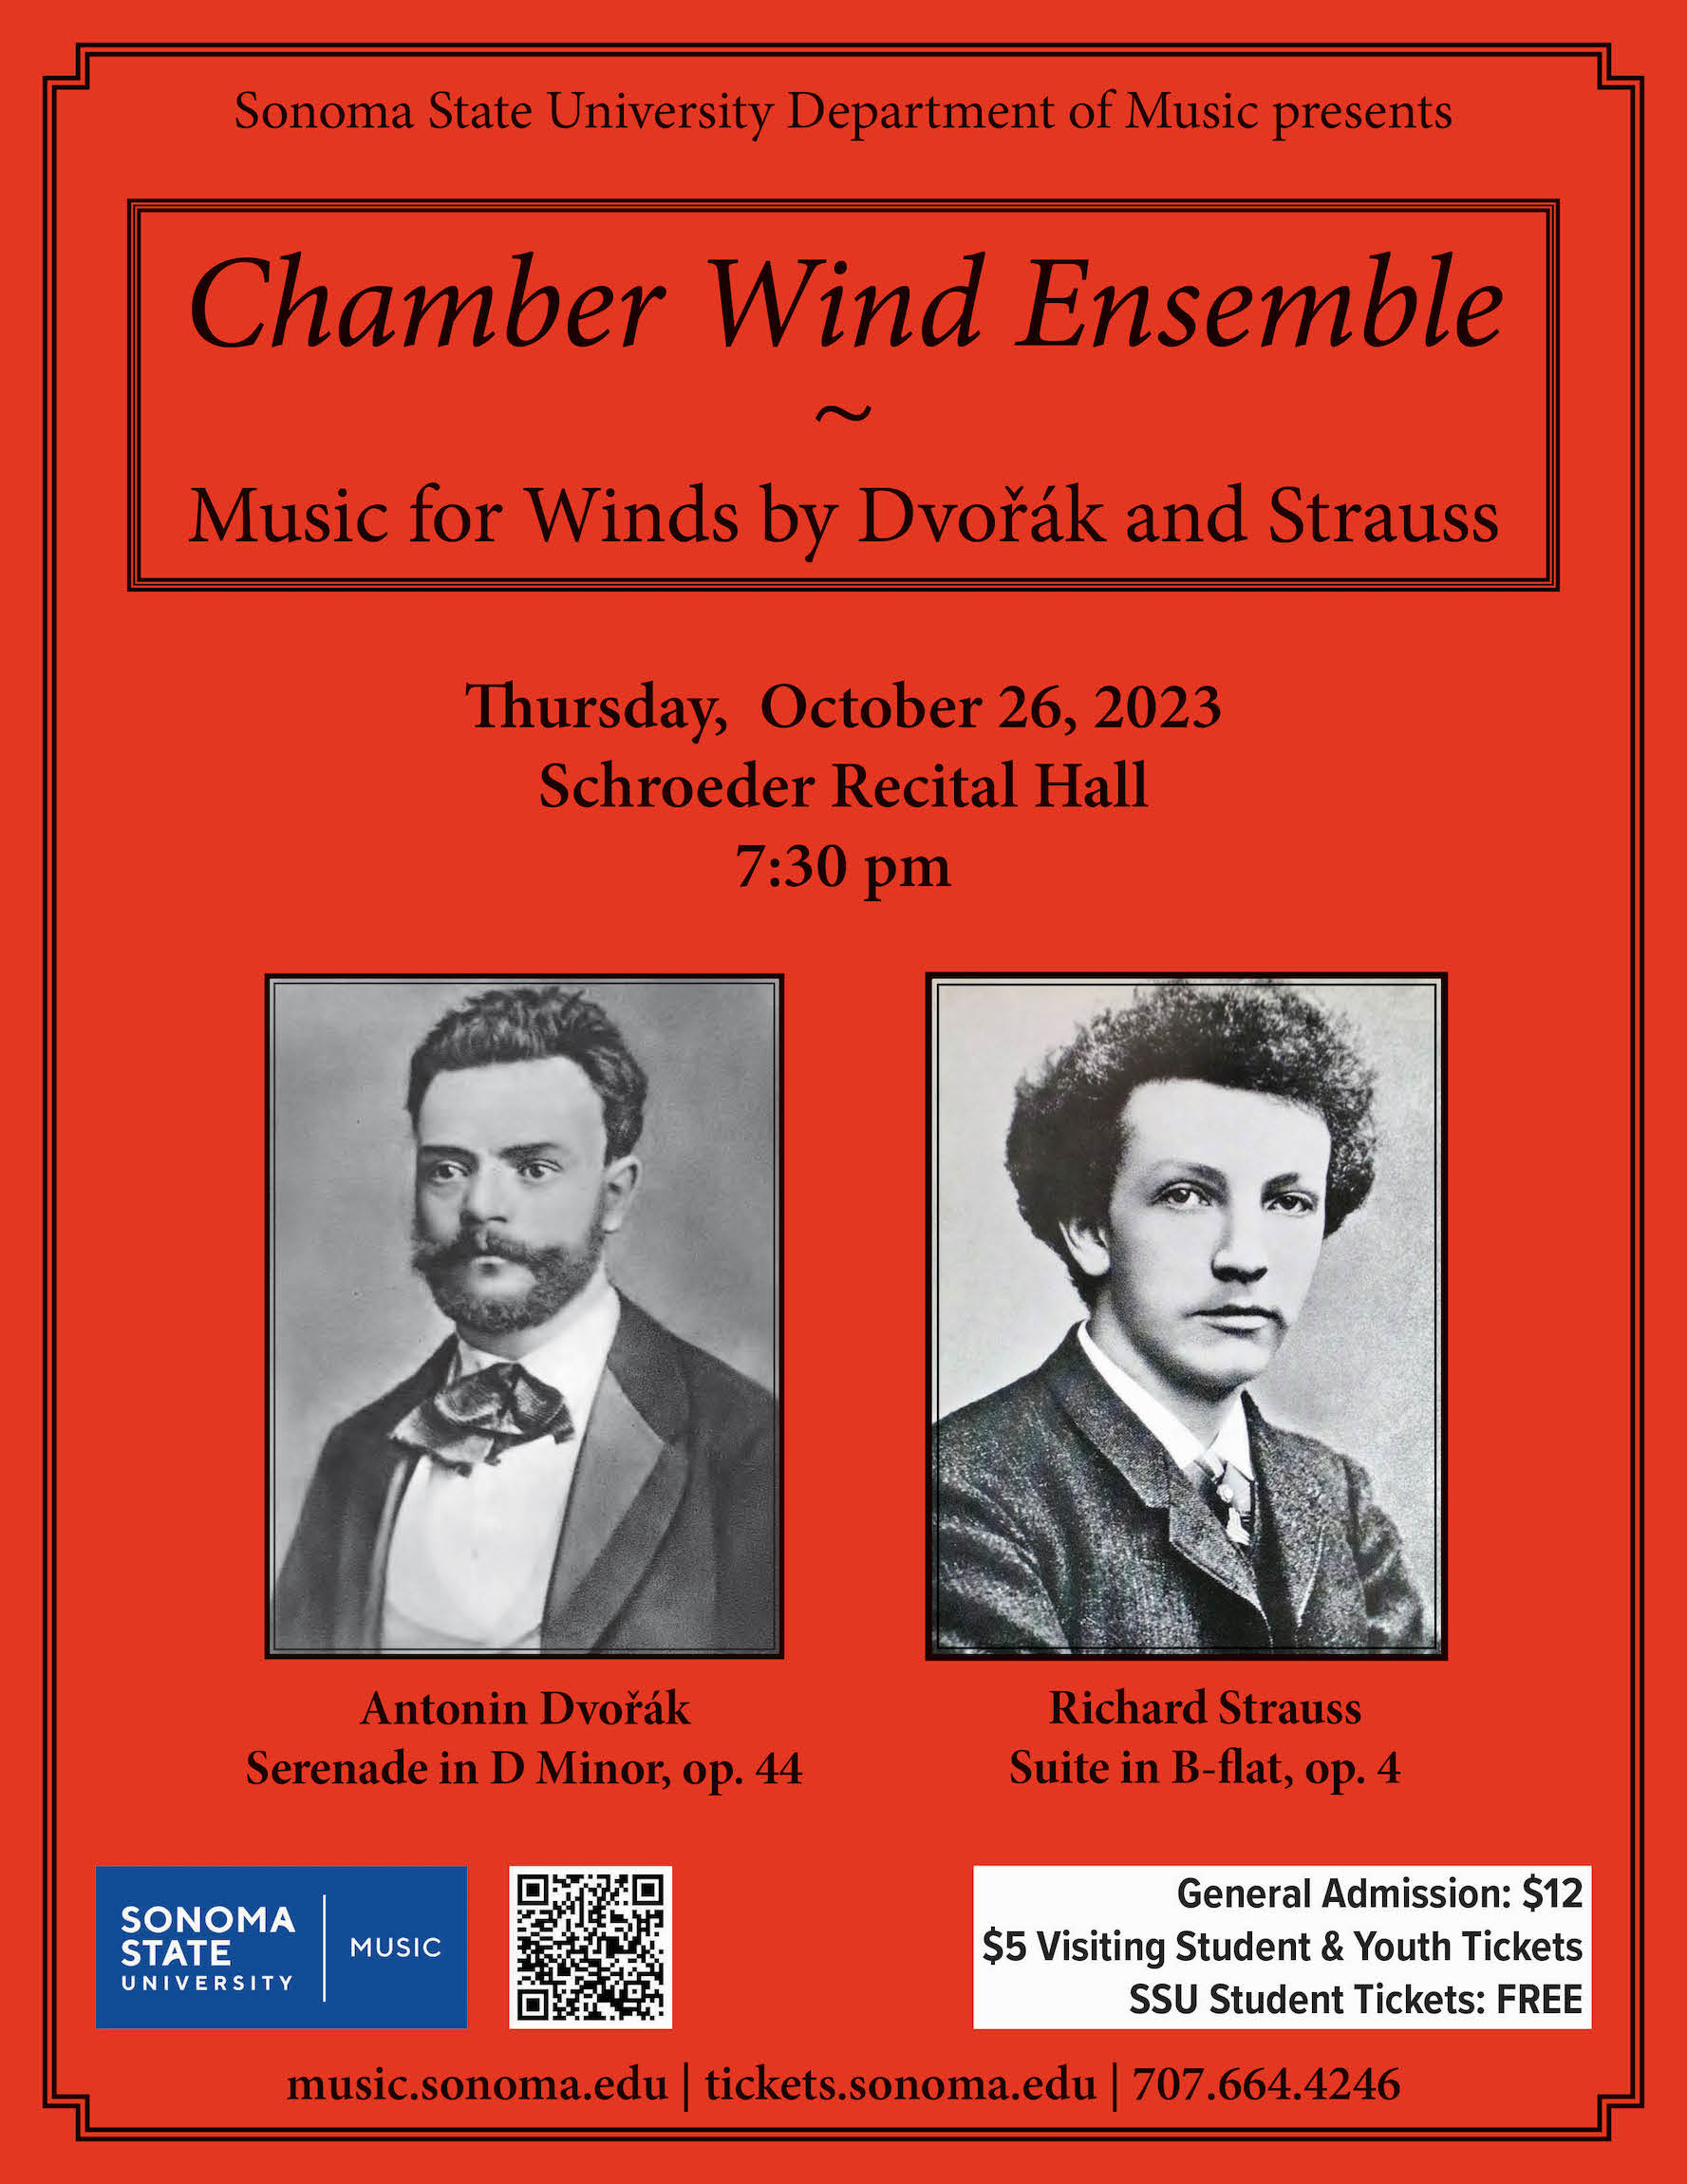 Chamber Wind Ensemble poster with Dvorak and Strauss